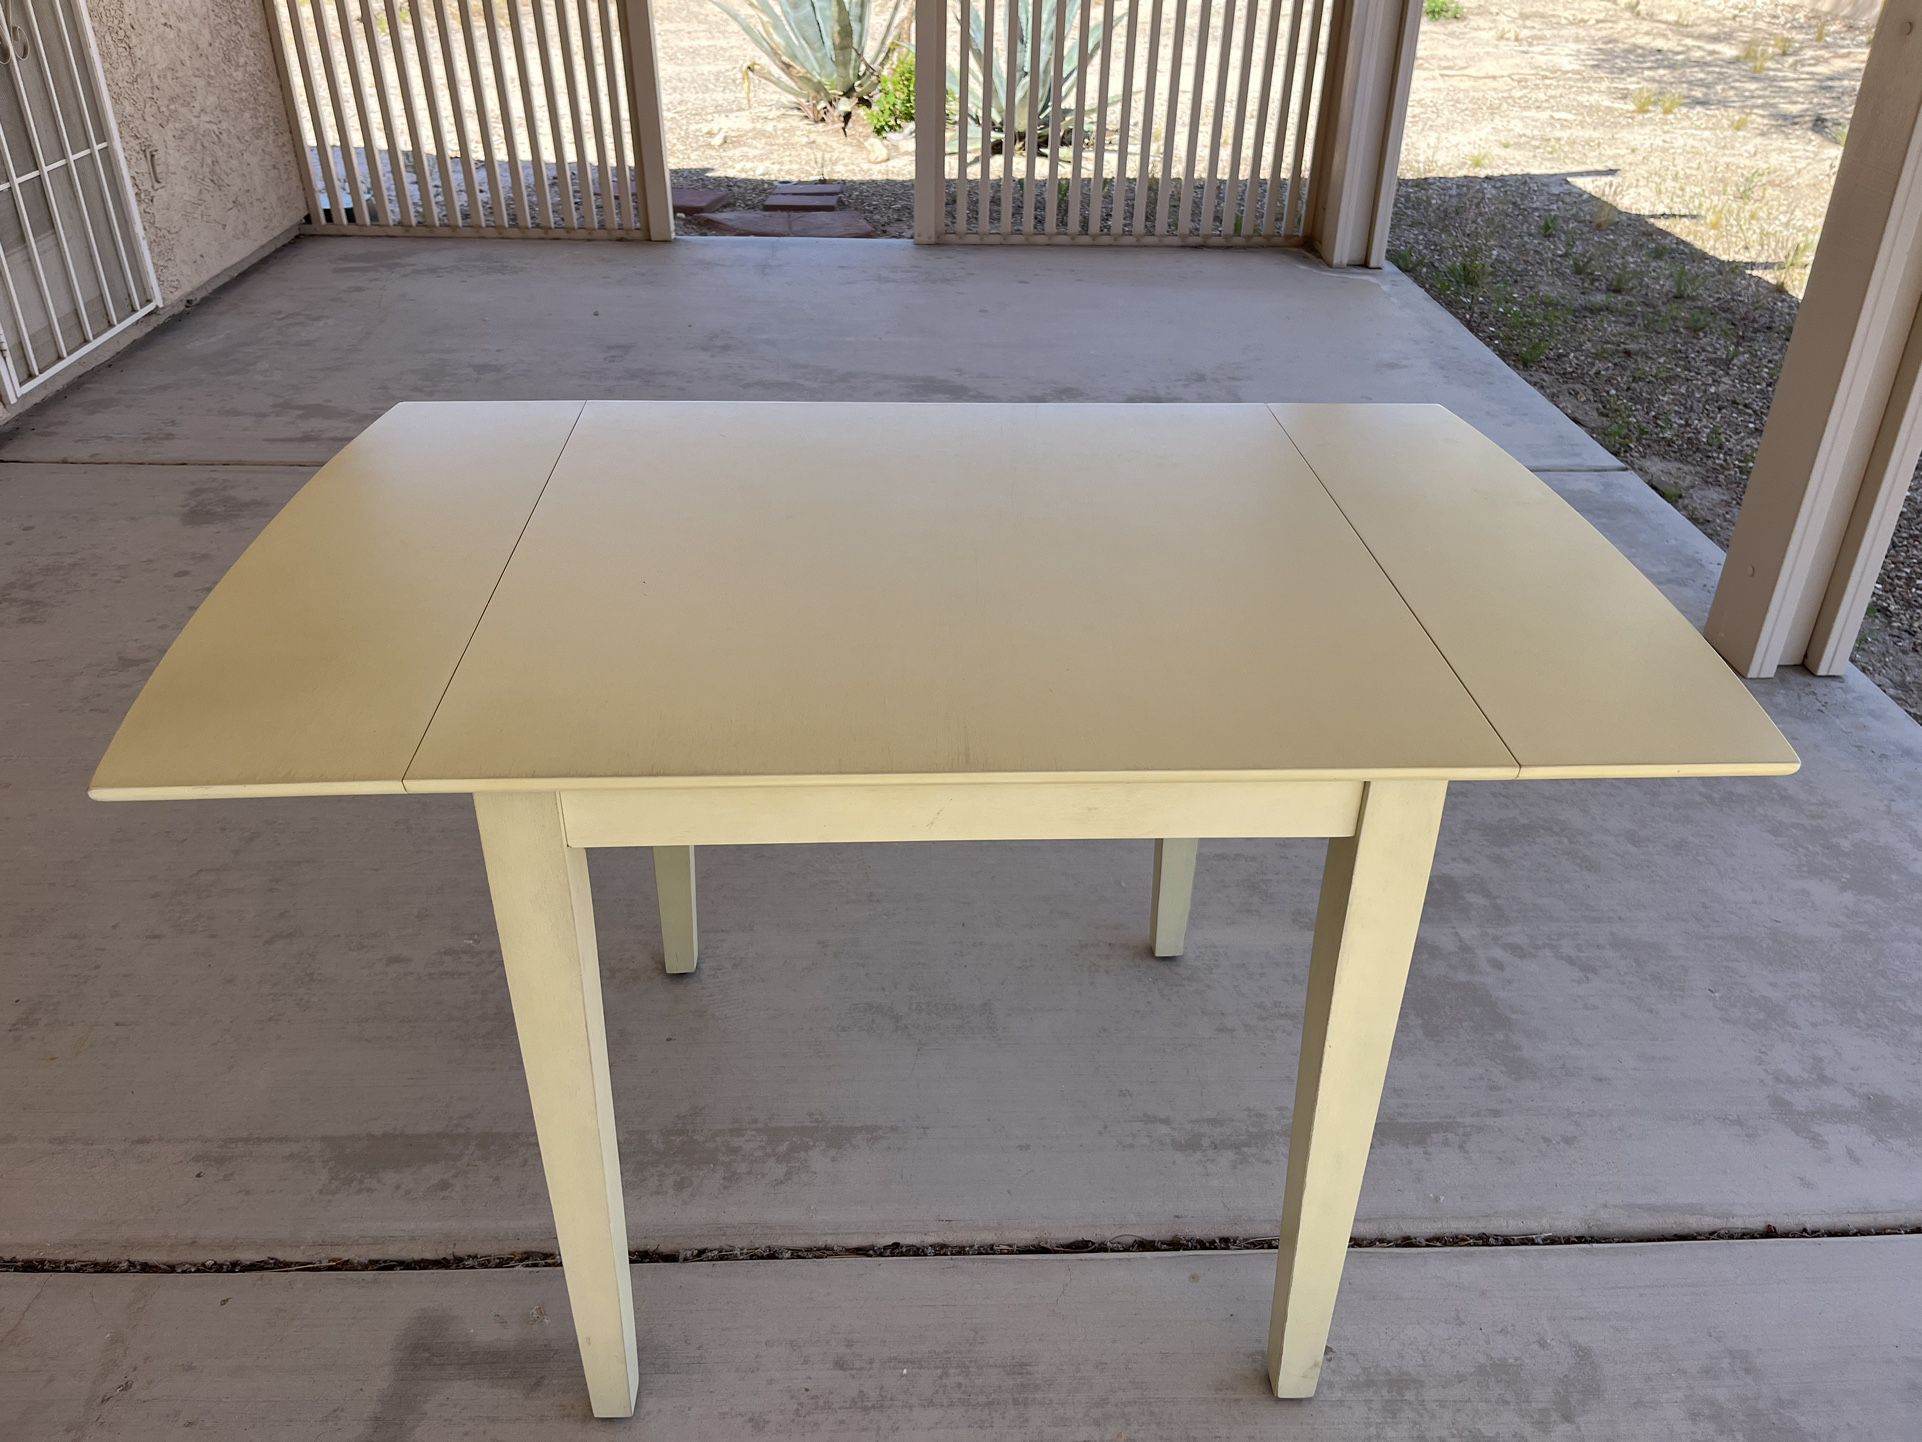 Kitchen Table with collapsible side leaves